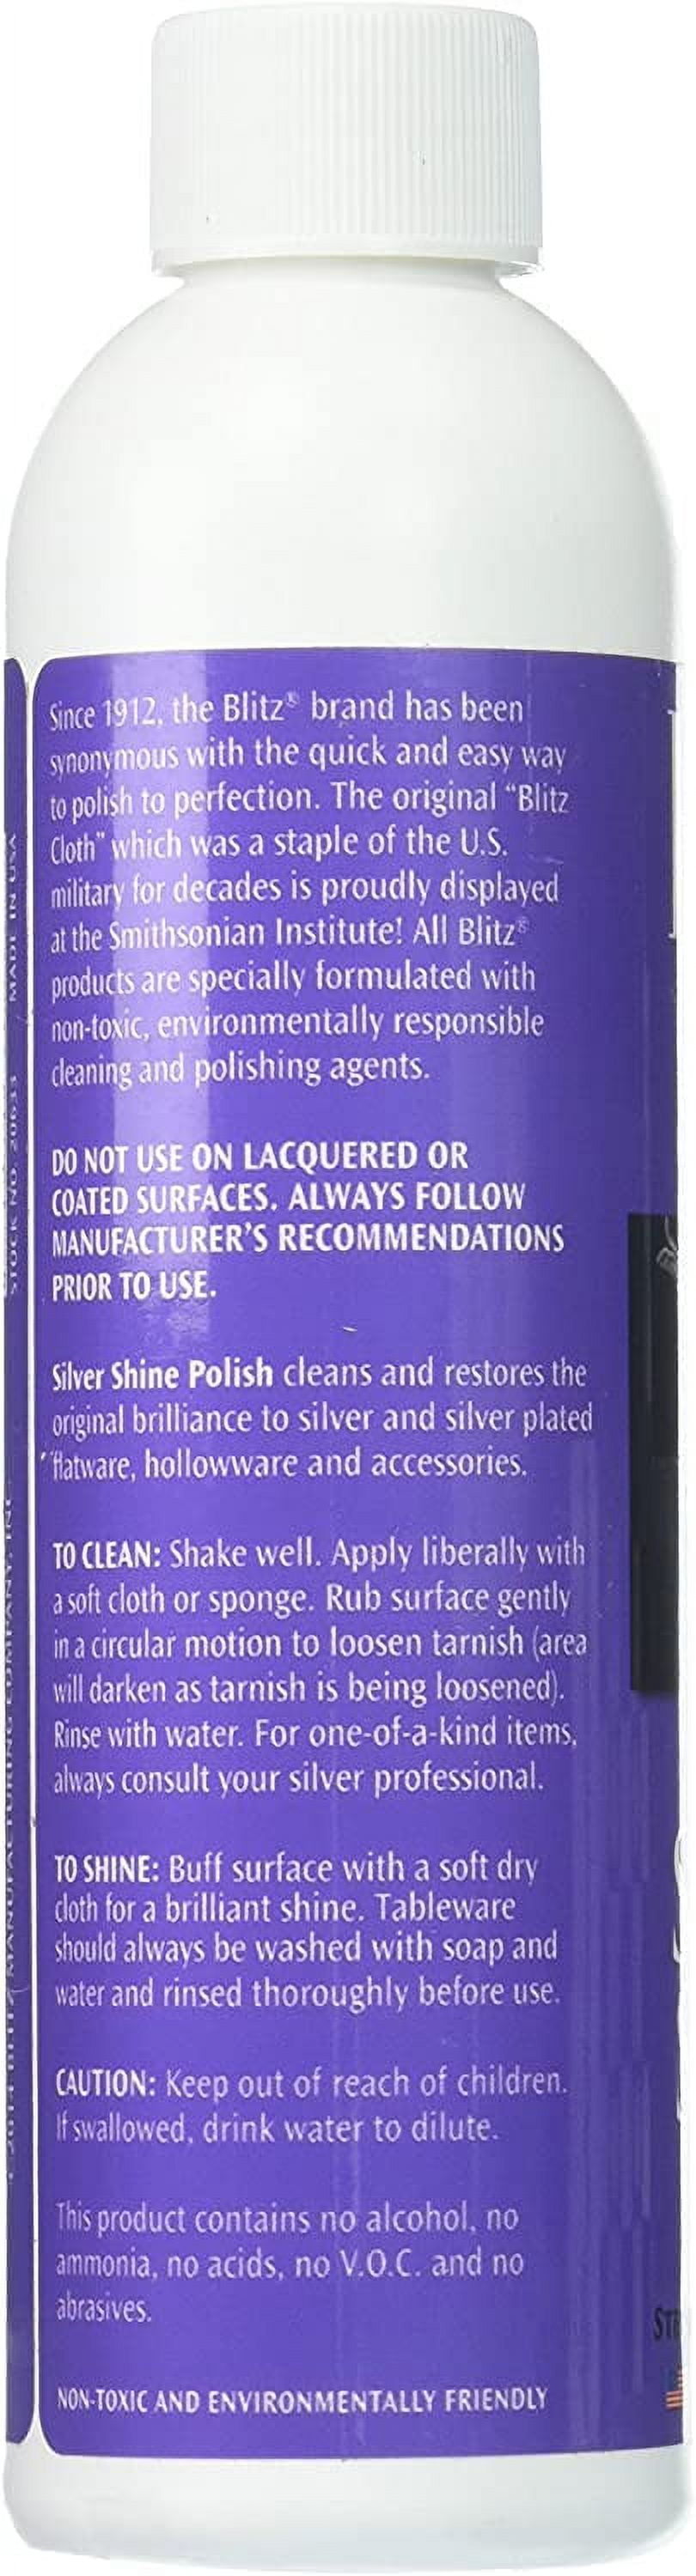 Weiman Silver Polish For Cleaning and Polishing Tarnish from Silver,  Metals, Jewelry - 8 oz (2 PACK) 